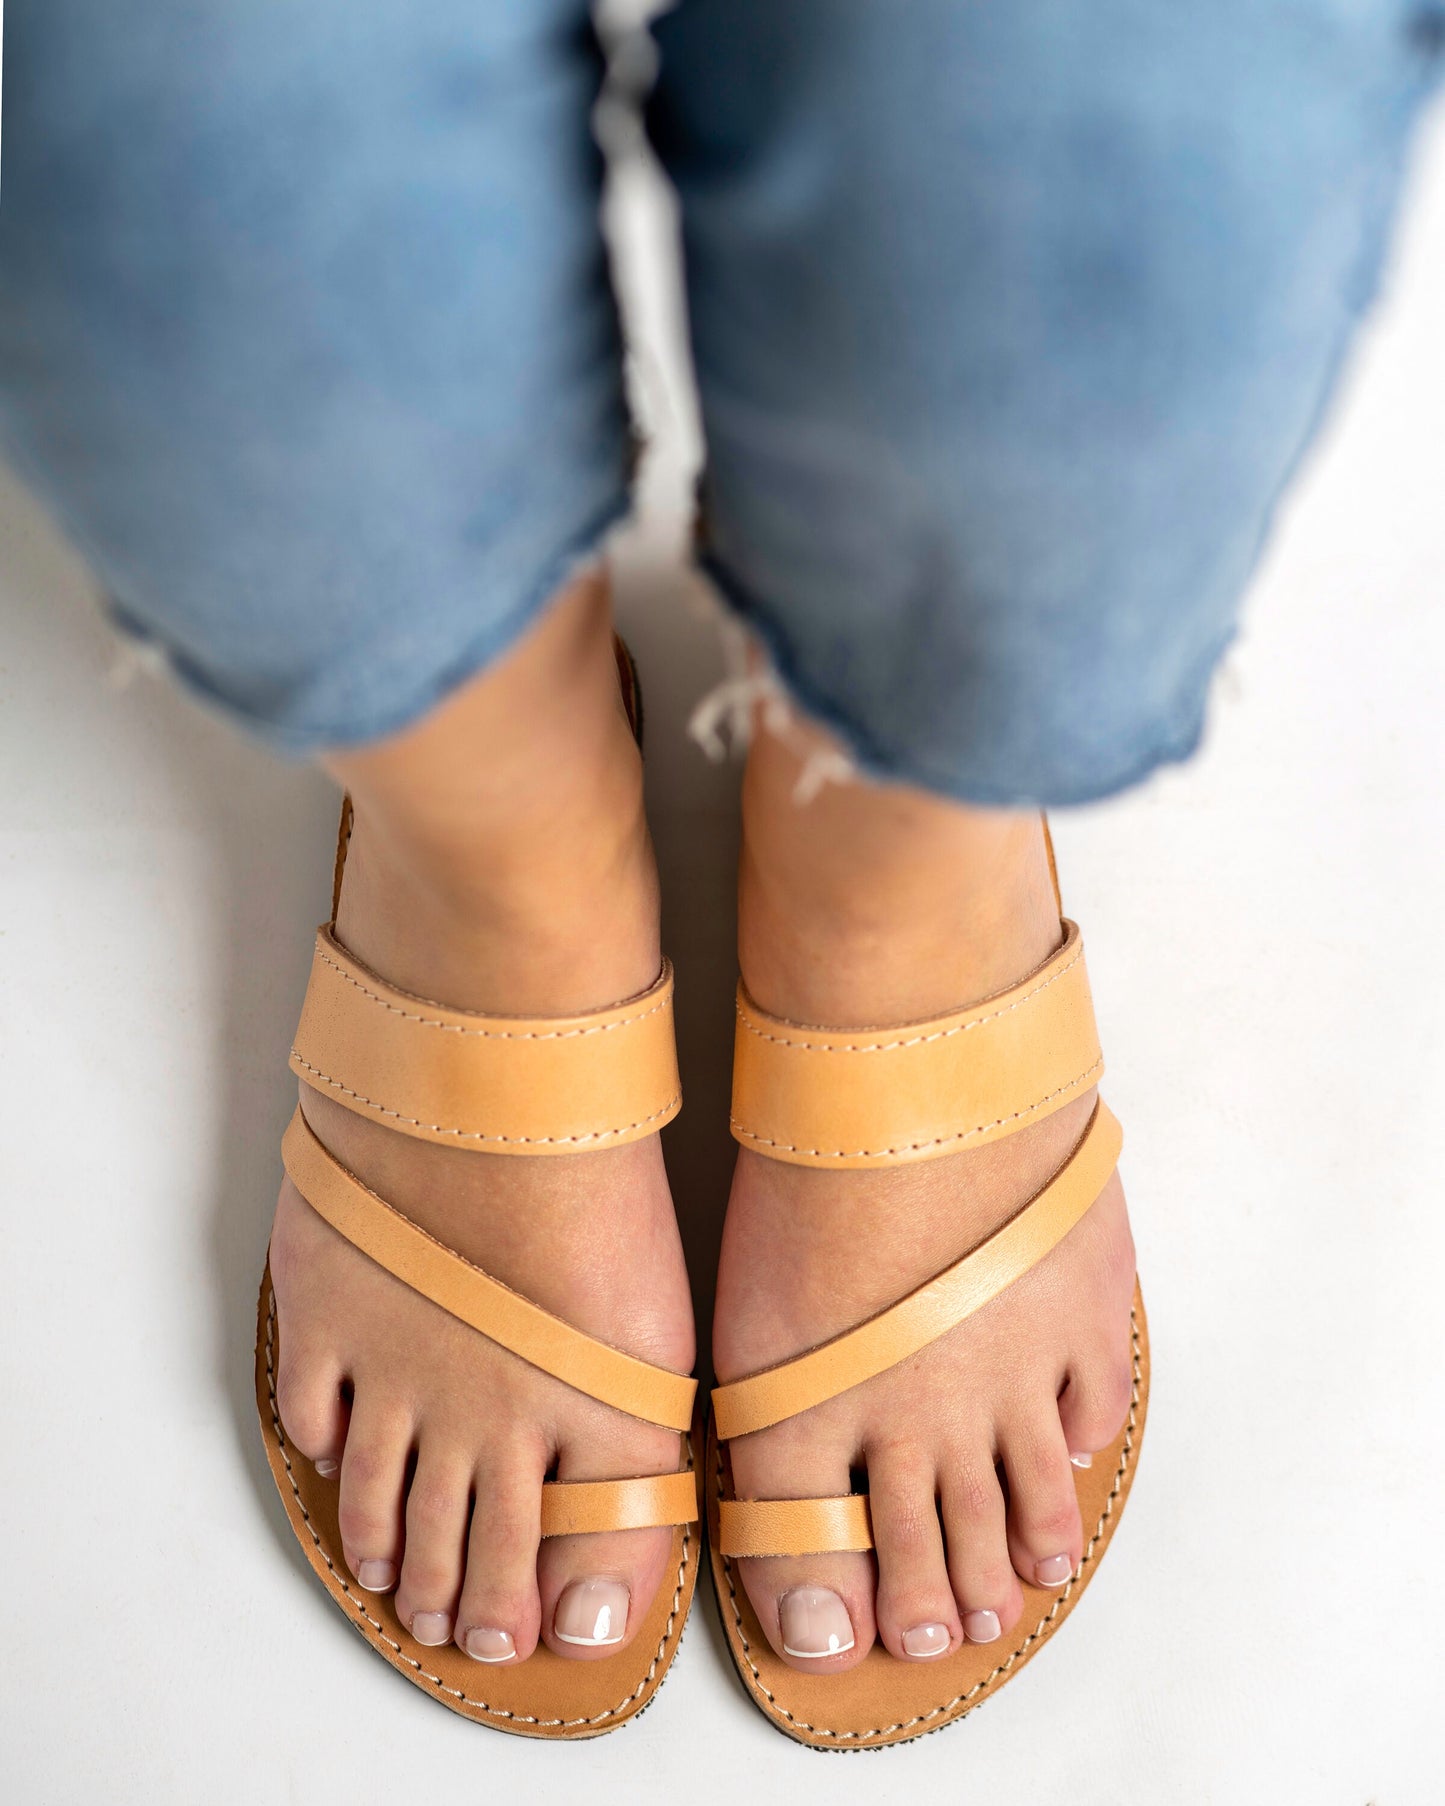 Brown leather sandals women, Toe ring leather sandals, Roman sandals, Flat leather sandals, Calf leather, Barefoot sandals